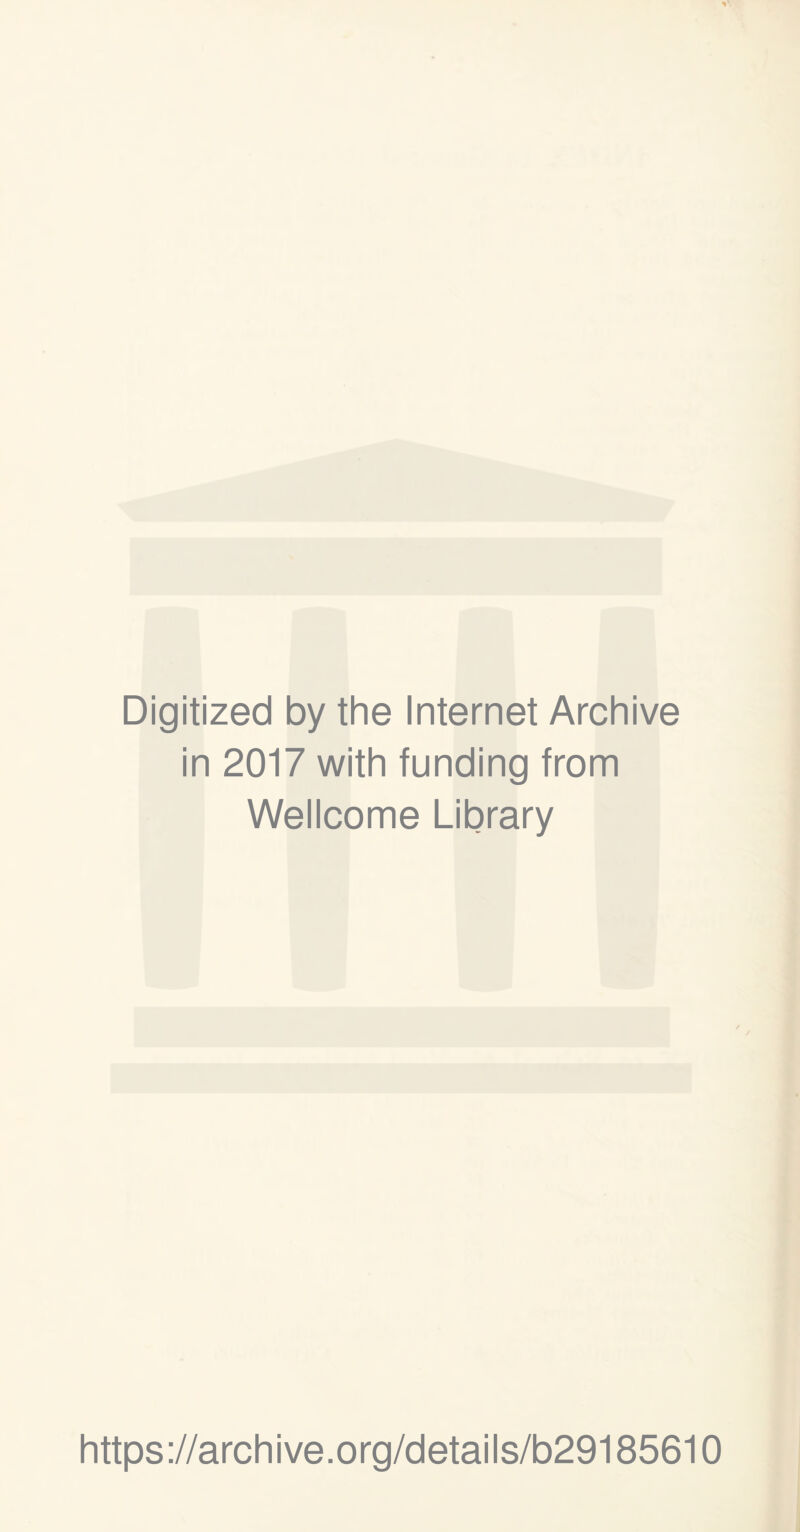 Digitized by the Internet Archive in 2017 with funding from Wellcome Library https://archive.org/details/b29185610